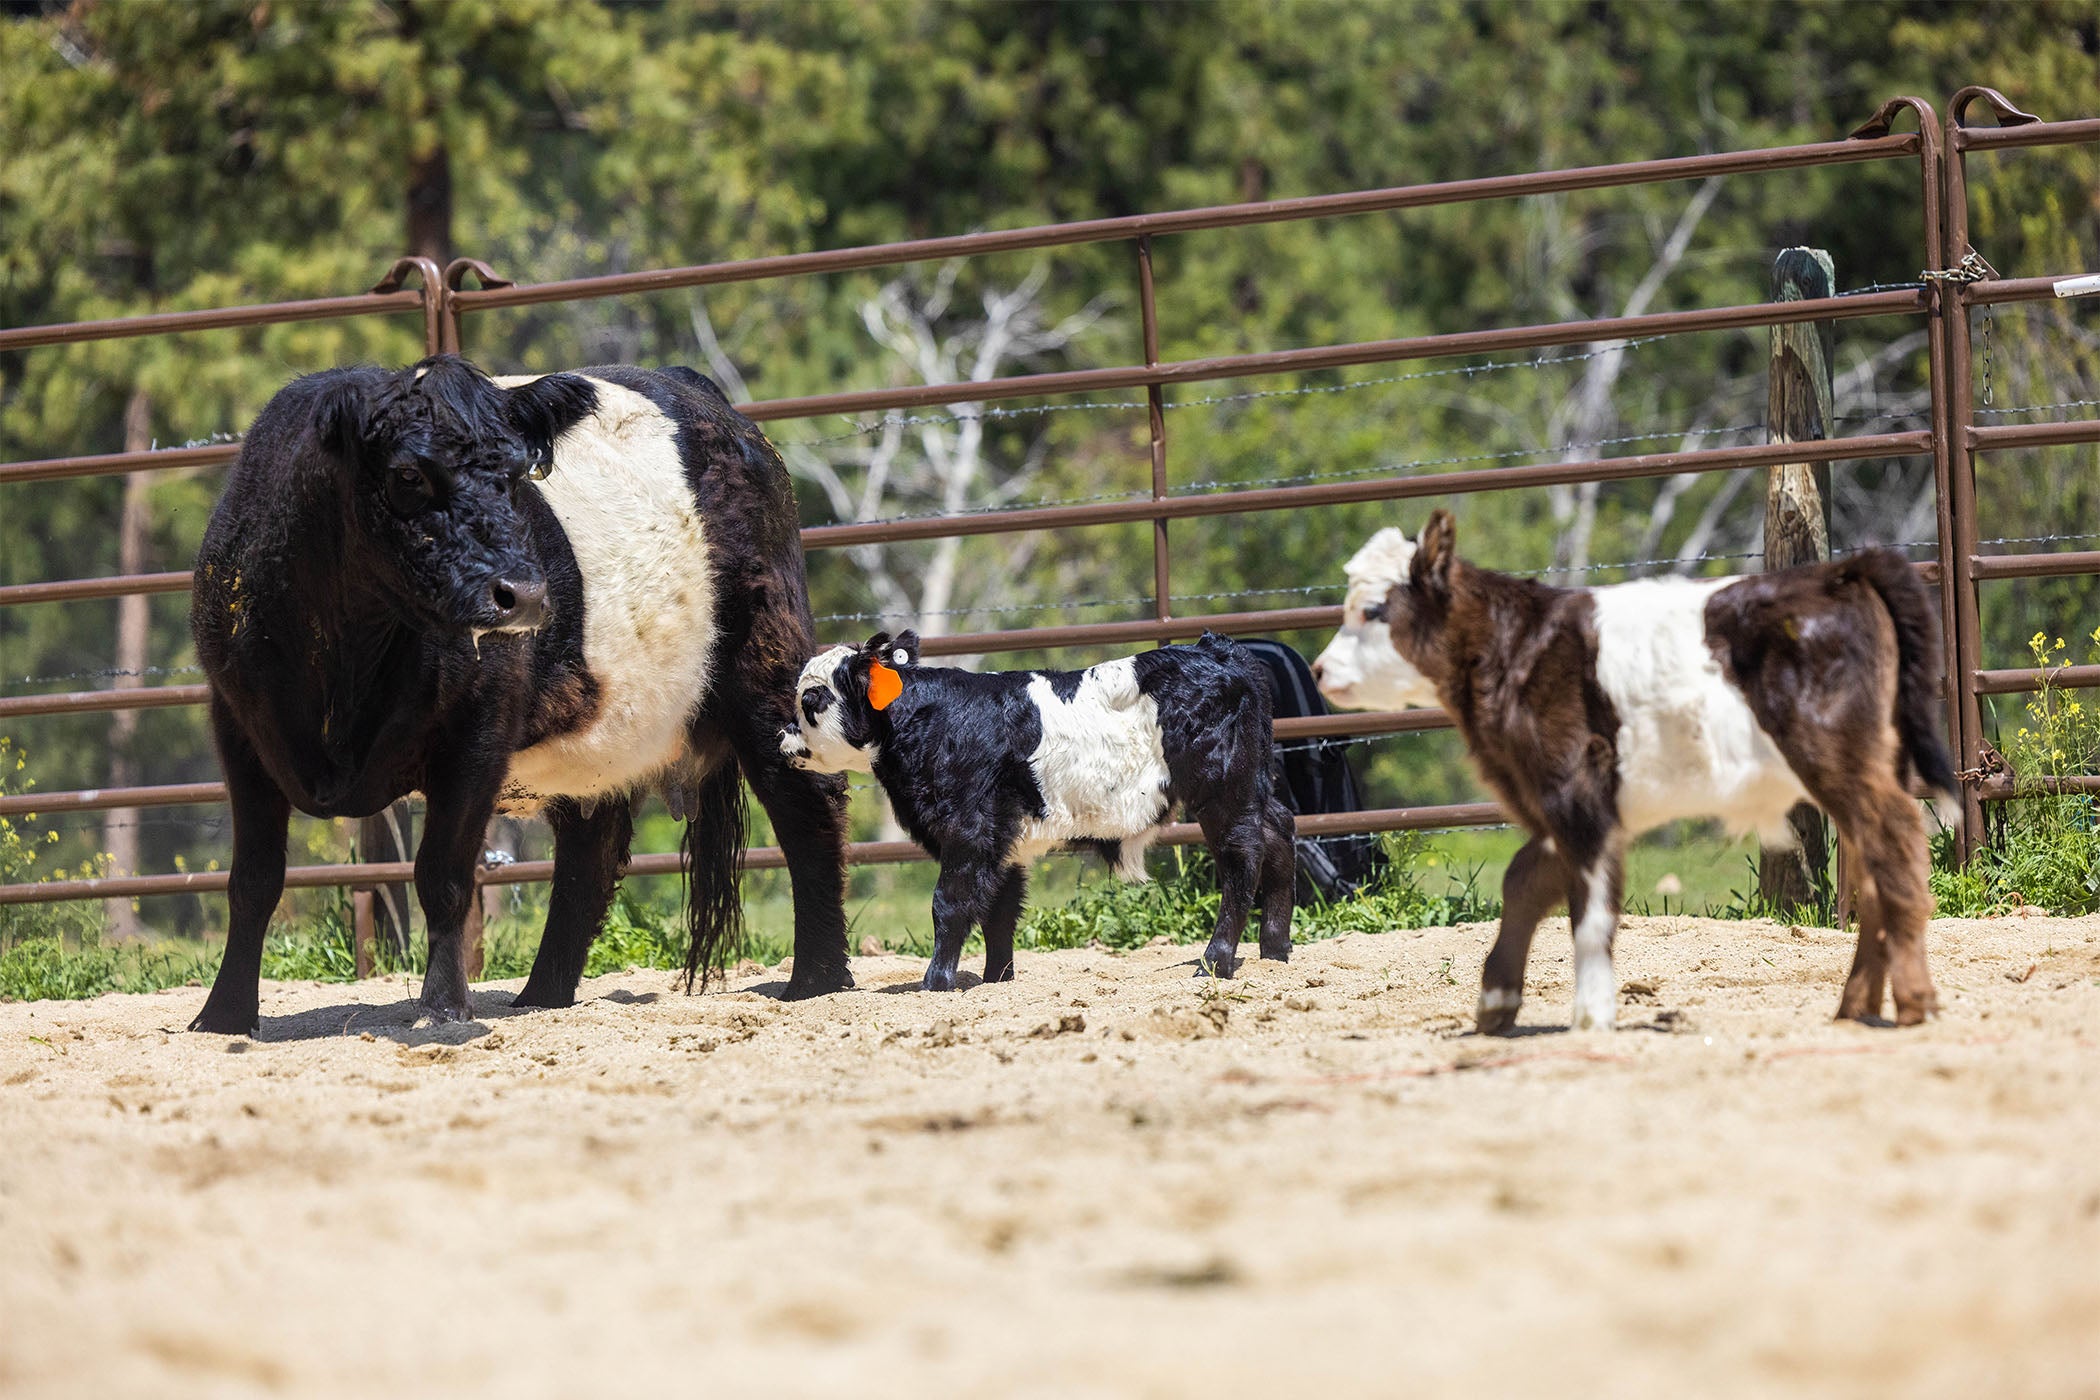 The Miniature Cattle Craze Is Bigger Than Ever - Hobby Farms